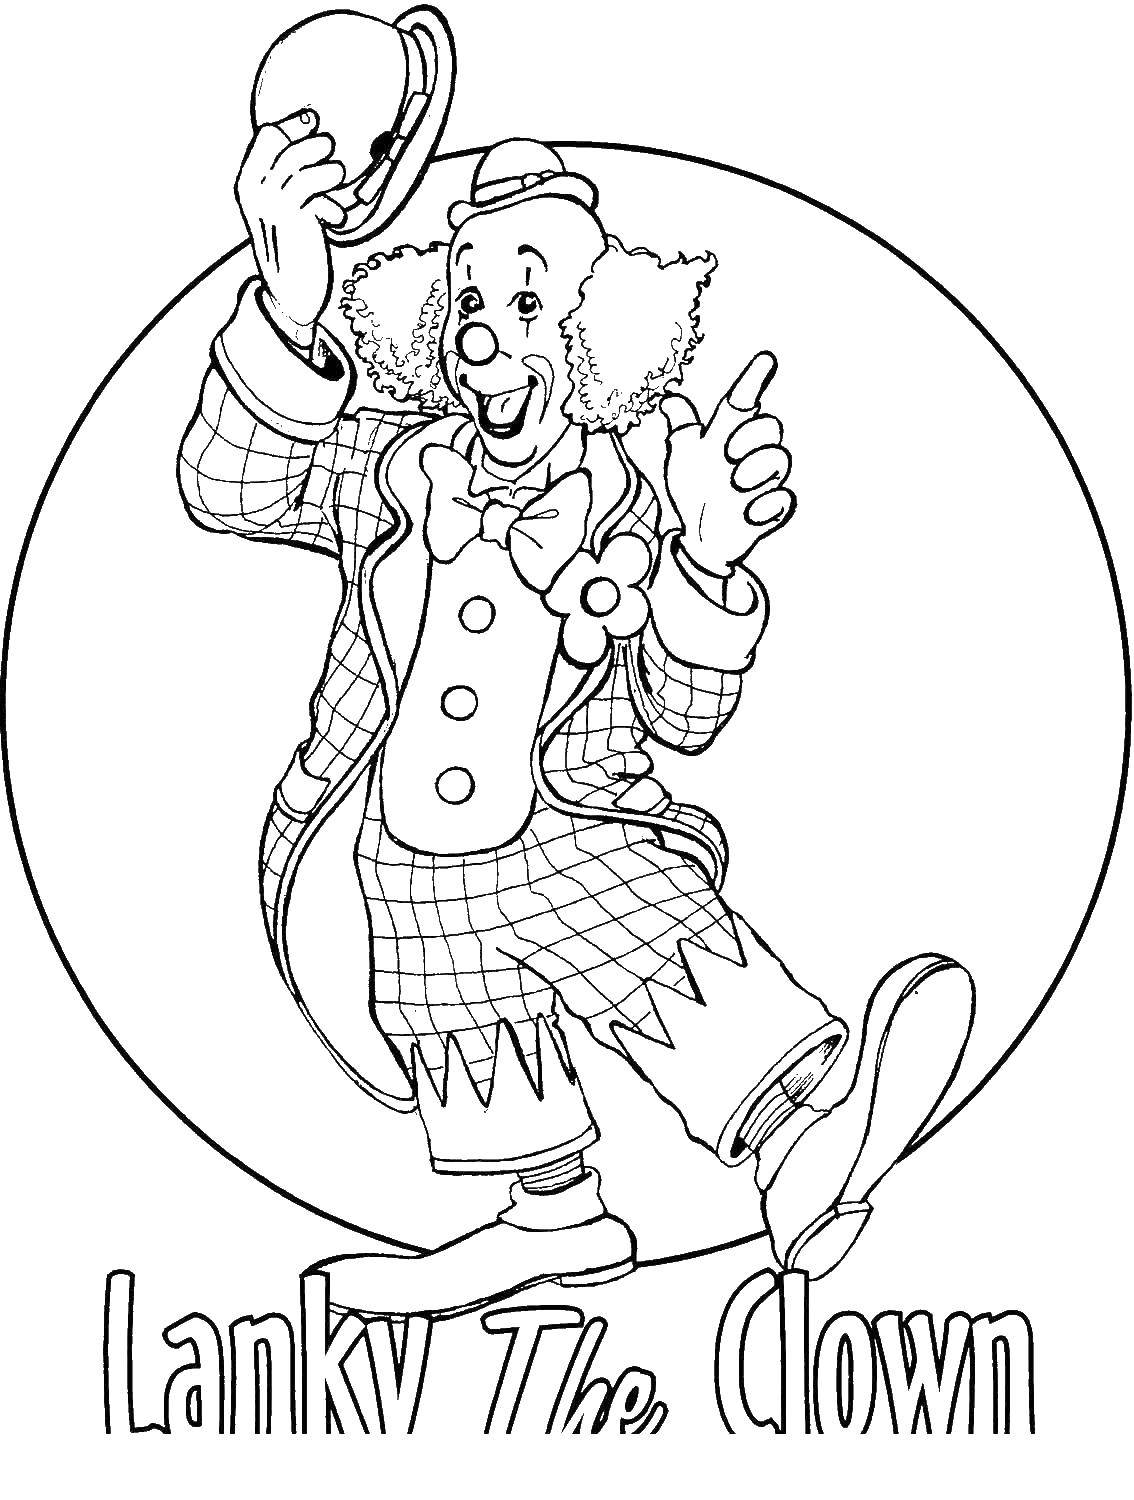 Coloring Clown. Category Clowns. Tags:  clowns, humor.